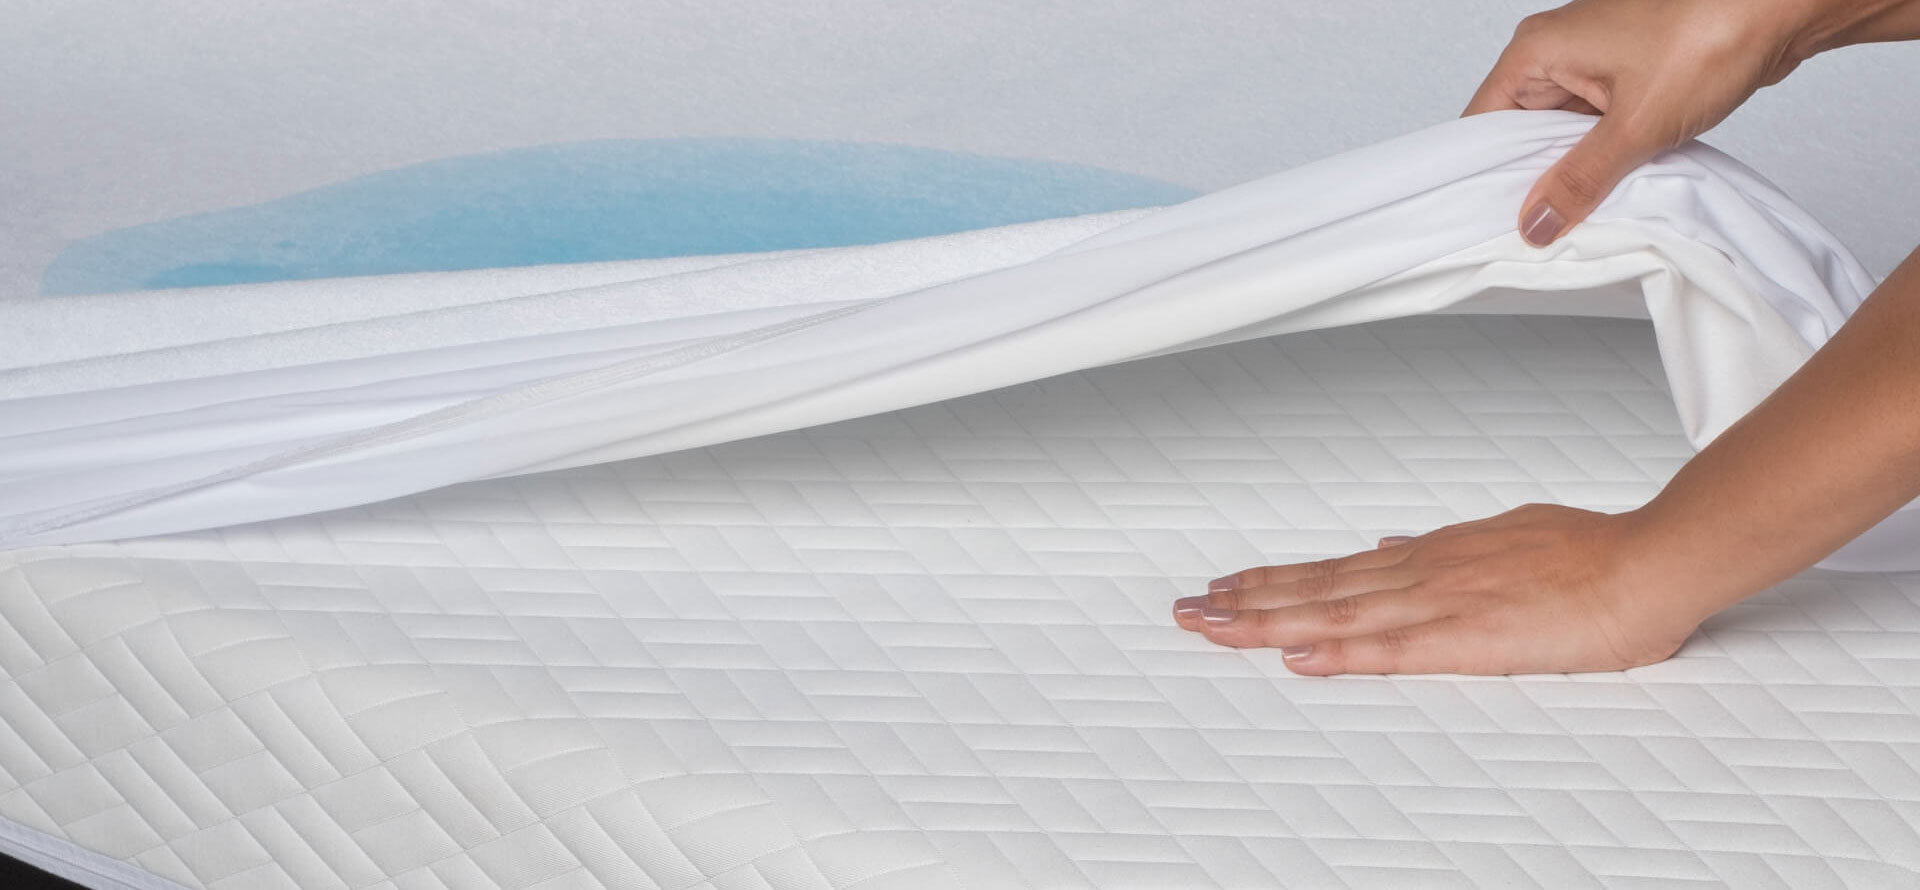 Mattress protector with hands.